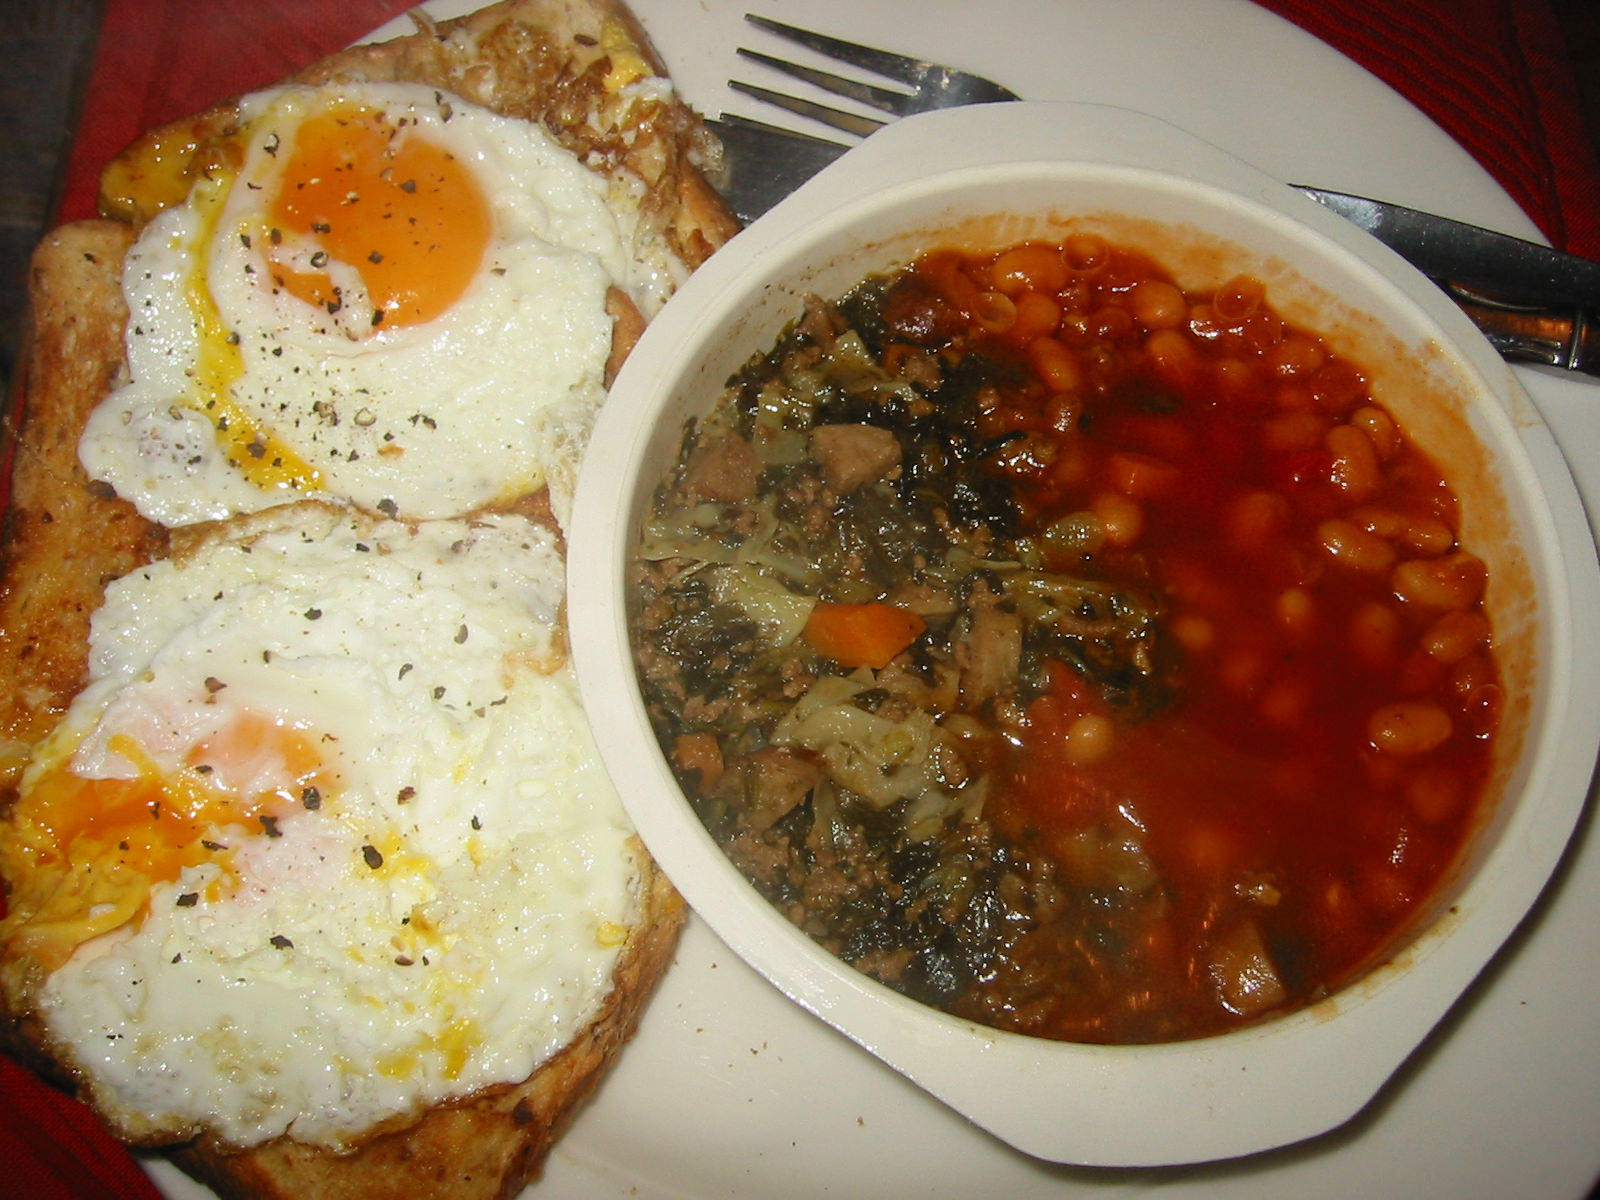 Eggs on toast, savoury mince and baked beans